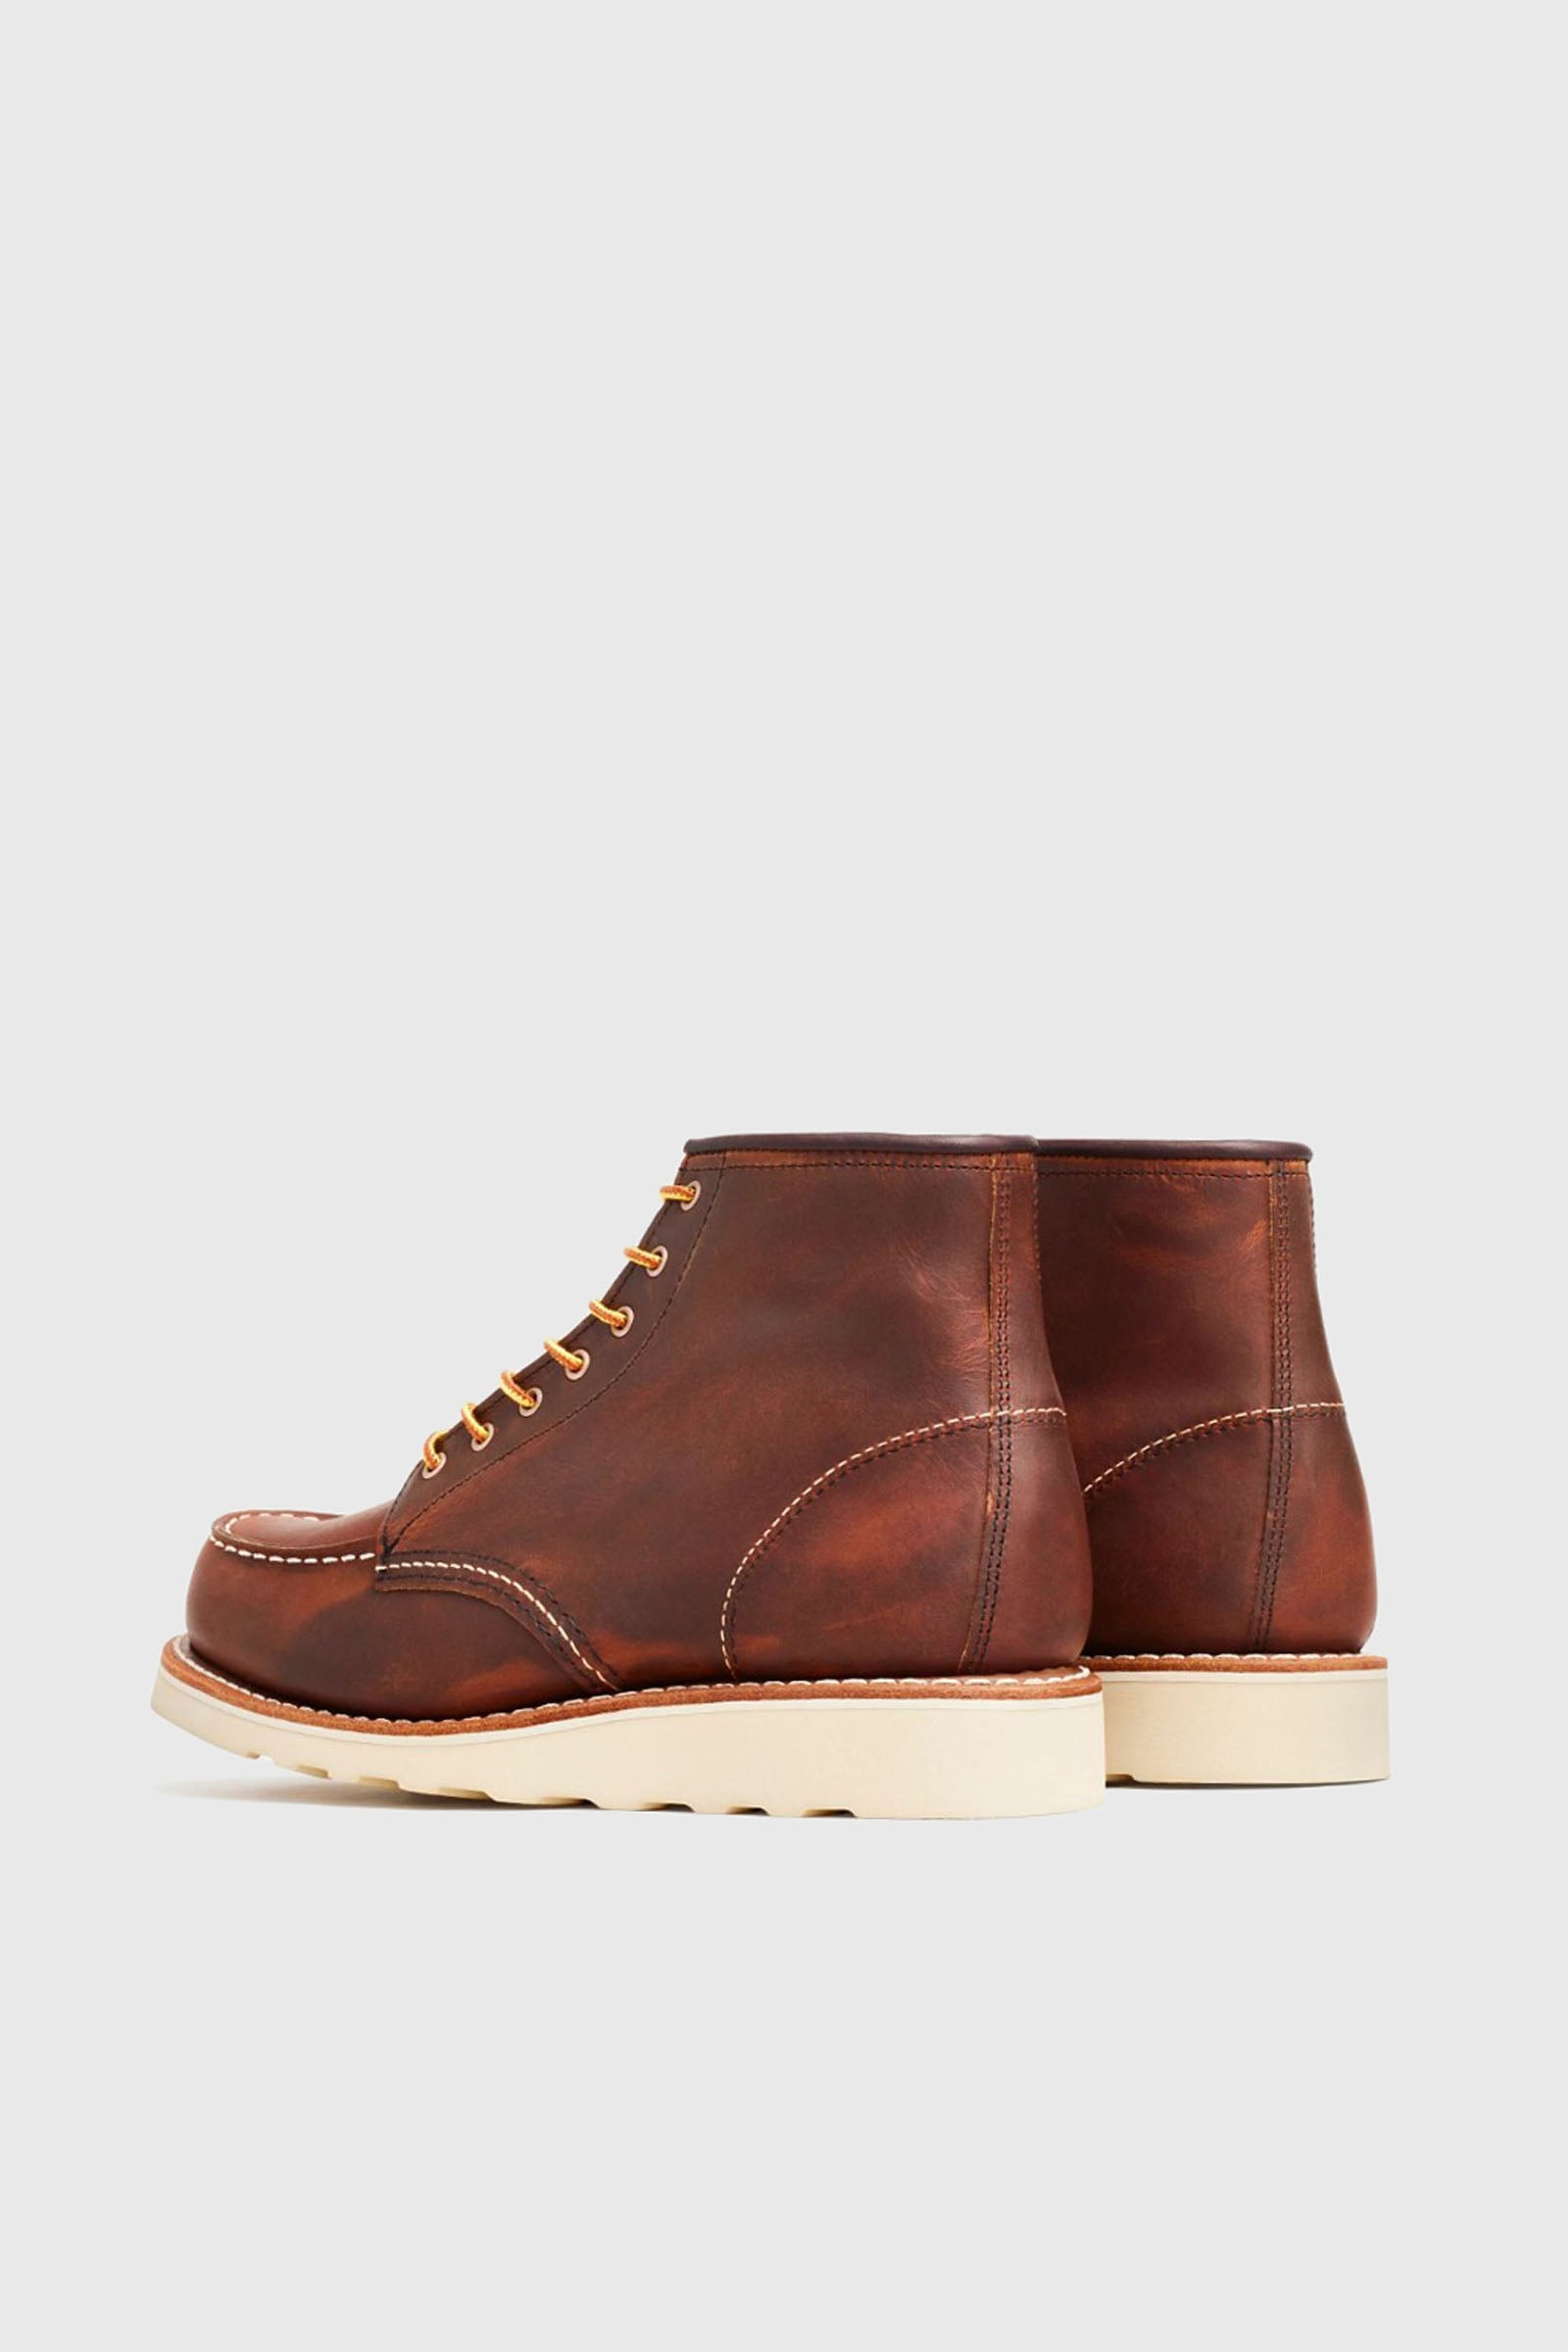 Red Wing Shoes 6-Inch Classic Moc Brown Leather - 3